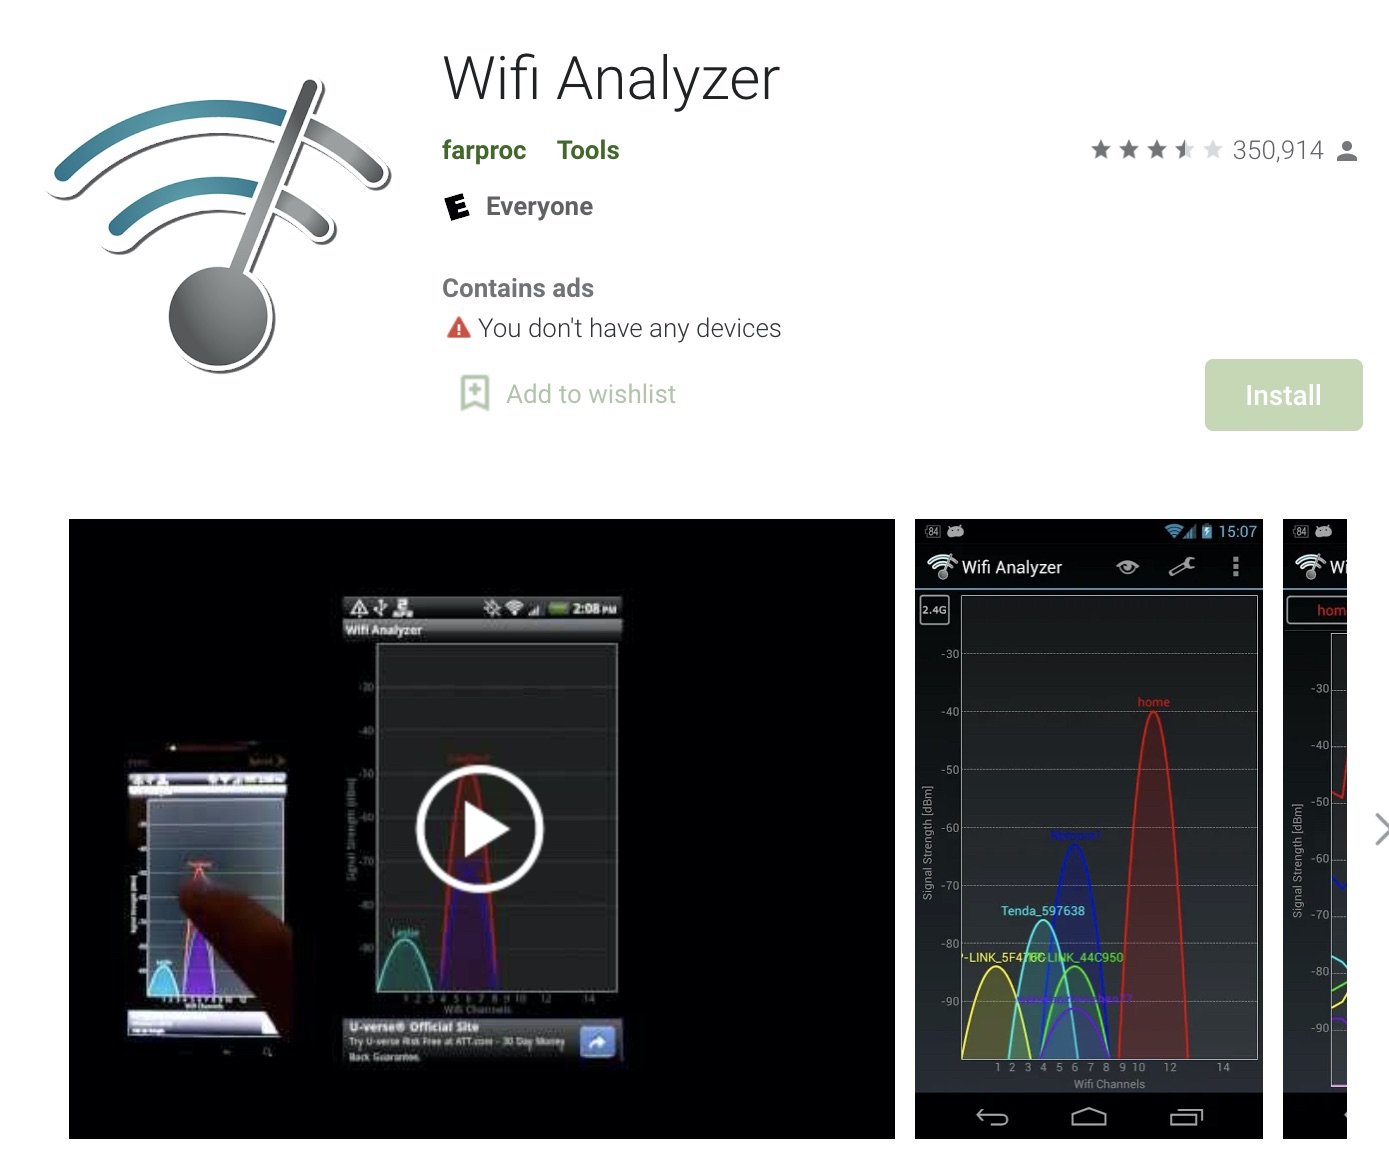 Image shows the home screen for the WiFi analyzer for Android